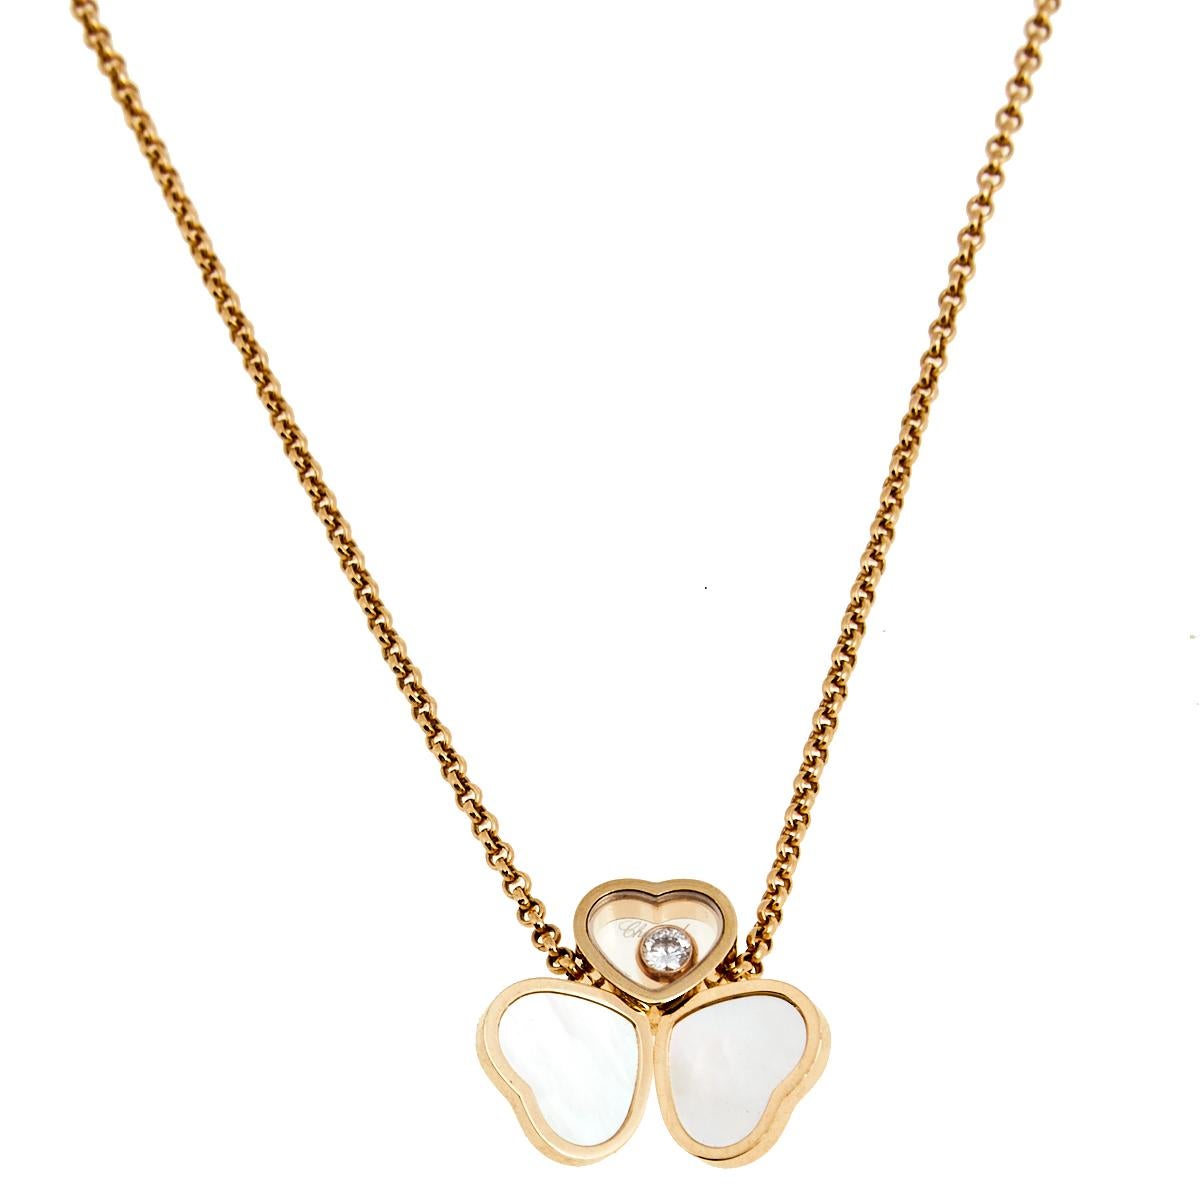 A charm of love you accompany you on all days. This Chopard Happy Hearts Wings necklace is made of 18k rose gold. The pendant is a gathering of three heart motifs—one cages a floating diamond while the other two are laid with mother of pearl and